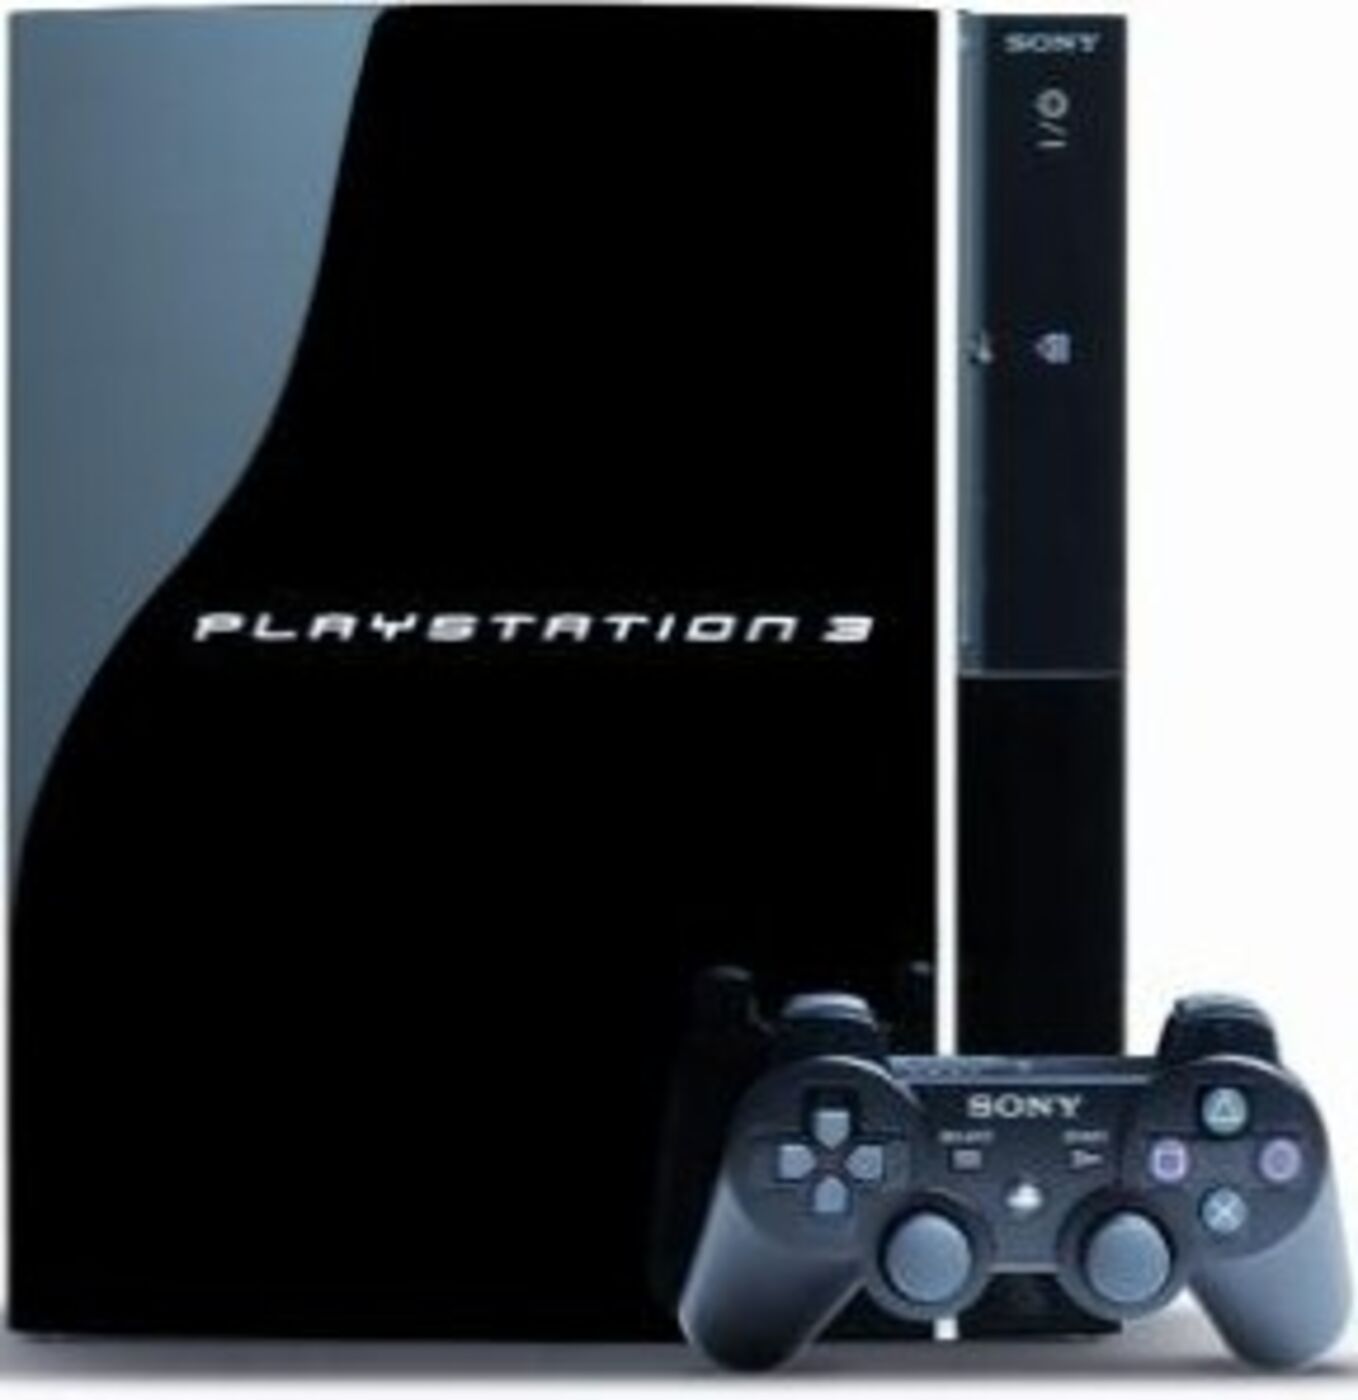 Sony Playstation 3 Console 80gb Version Ps3